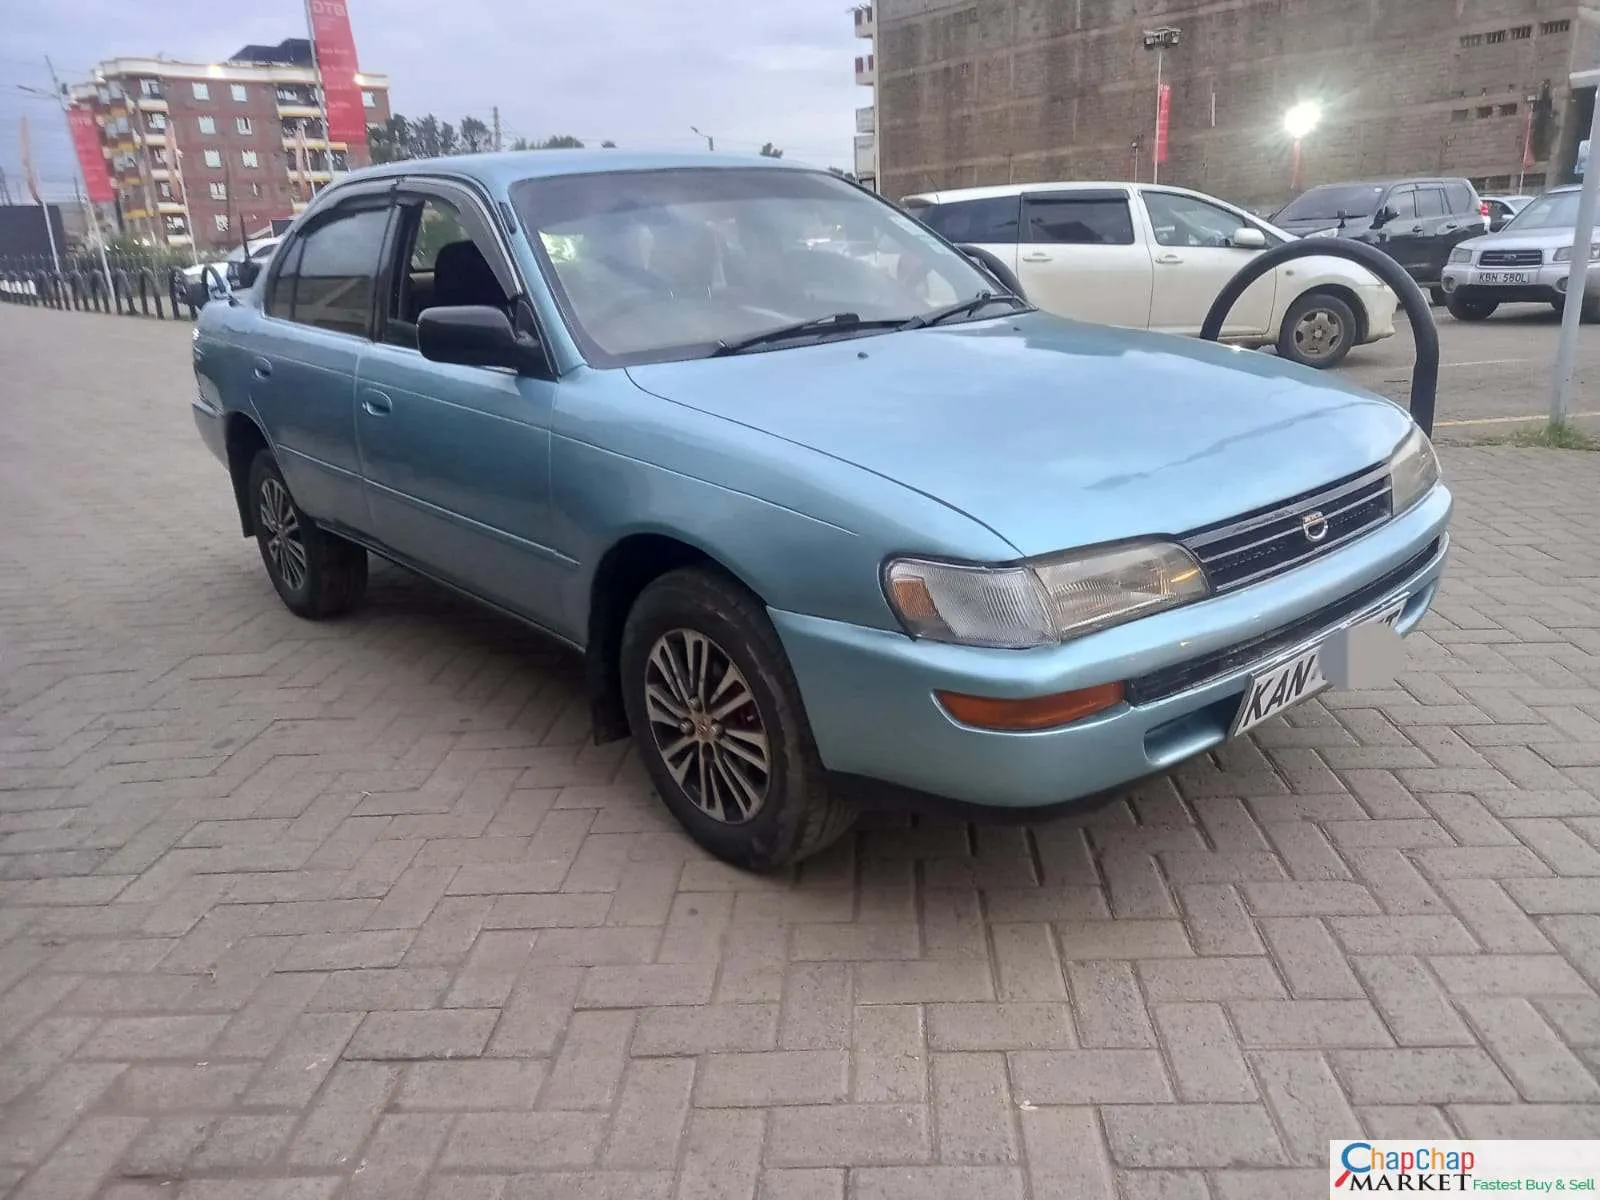 Toyota AE 100 Corolla QUICK SALE You Pay 30% Deposit Trade in OK Toyota 100. 4e. Hire purchase installments (SOLD)